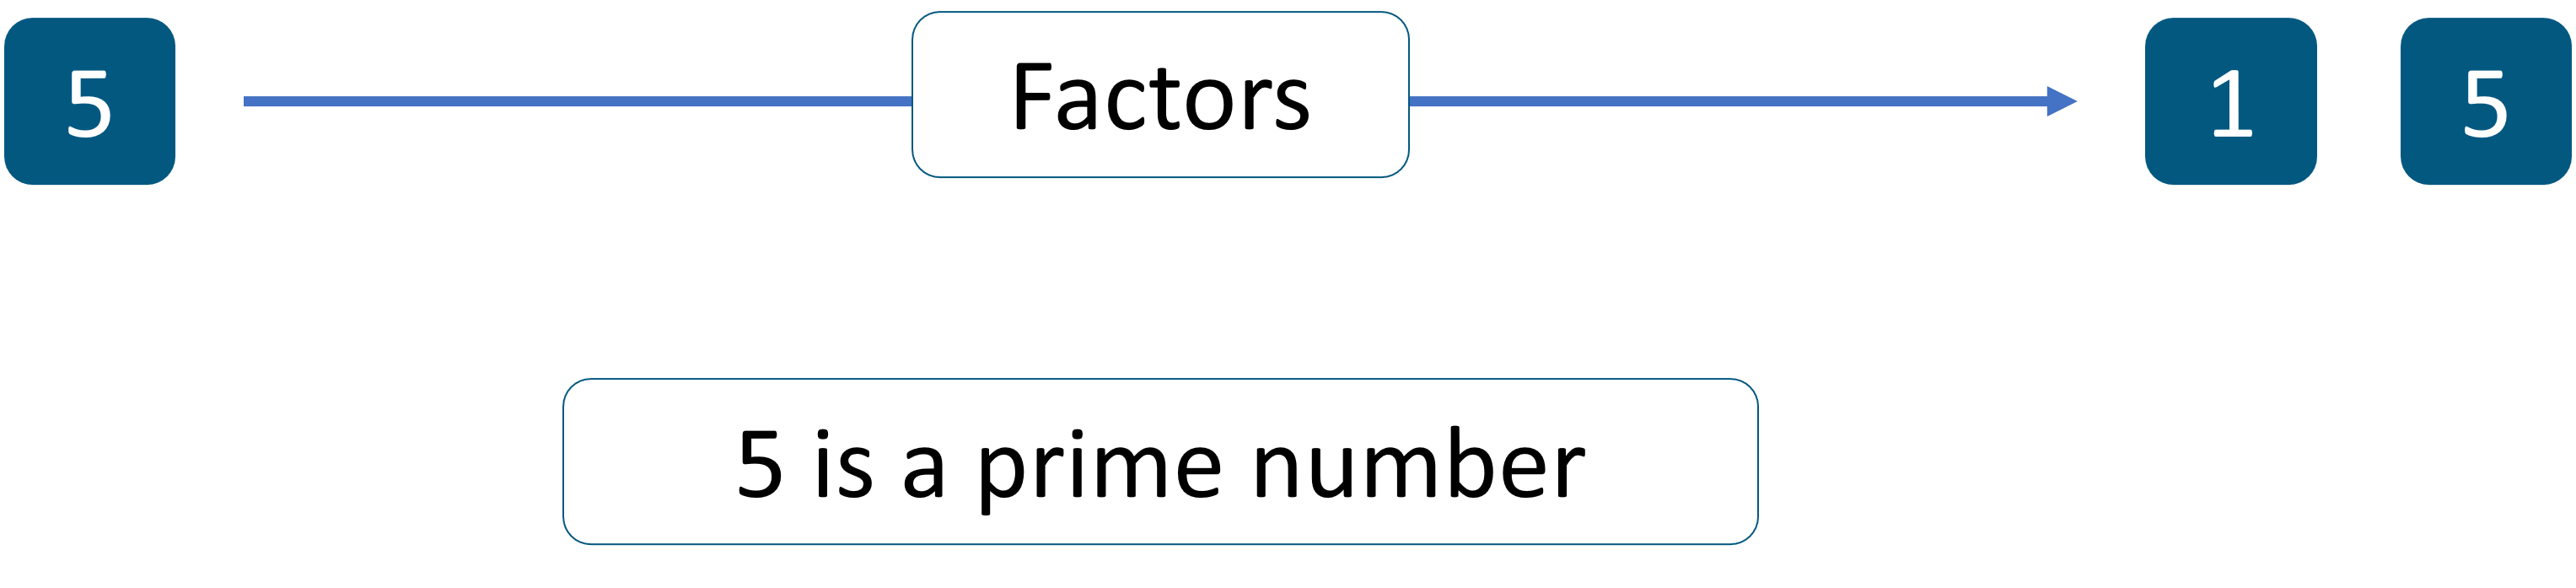 5 is Prime Number